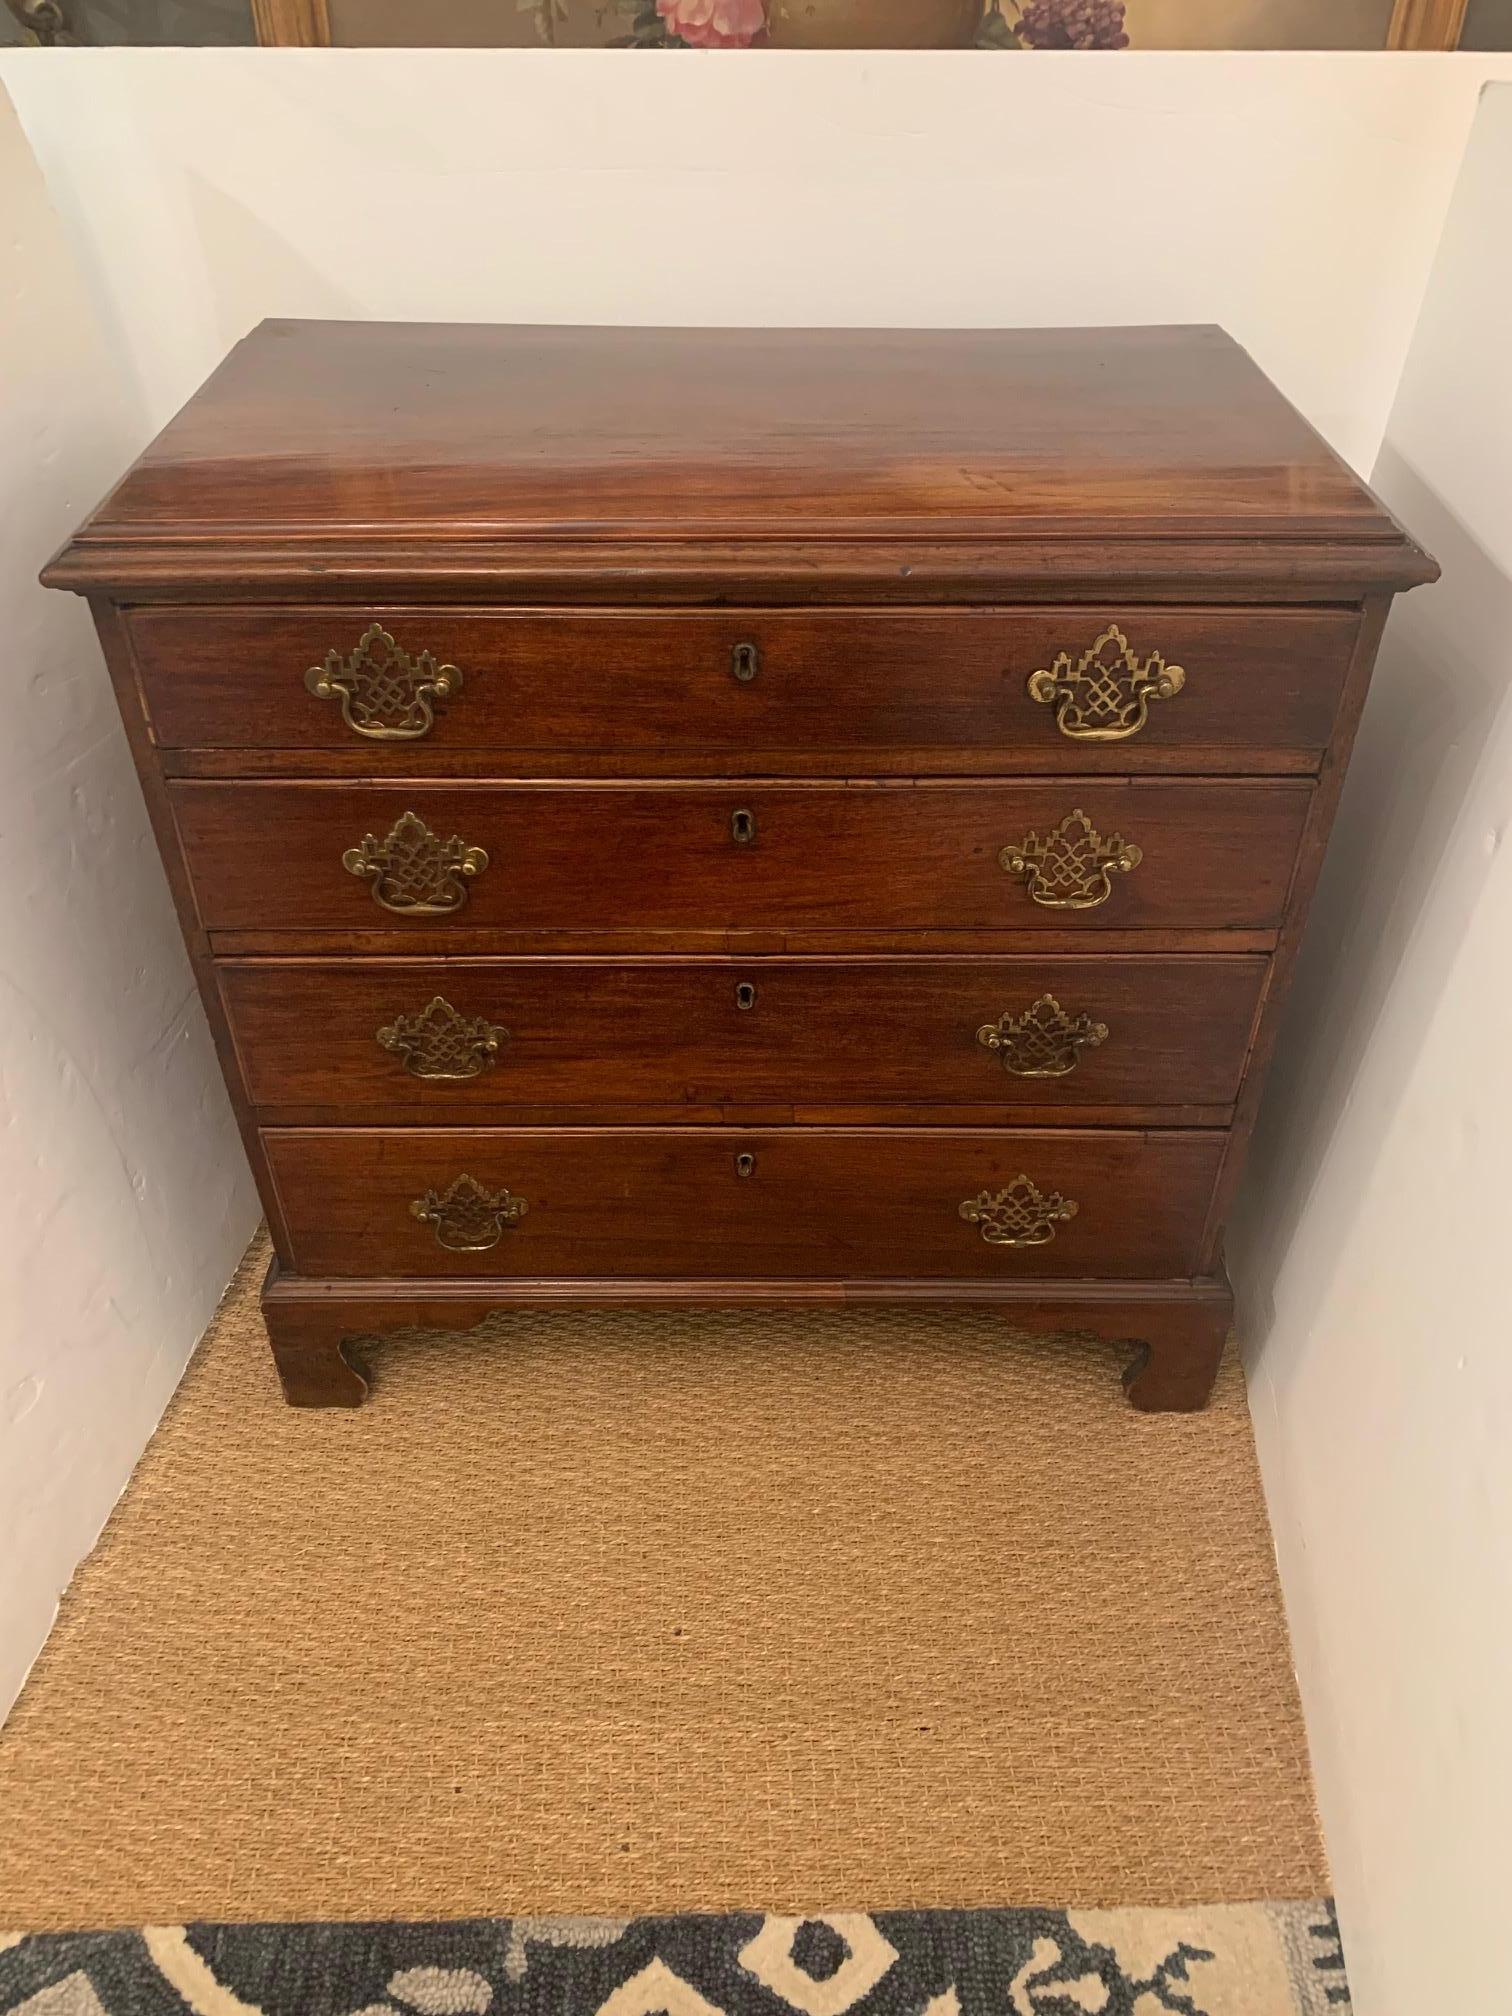 Classic fine 18th century Georgian mahogany chest of drawers in a small to medium size having 4 drawers and handsome original brass hardware.